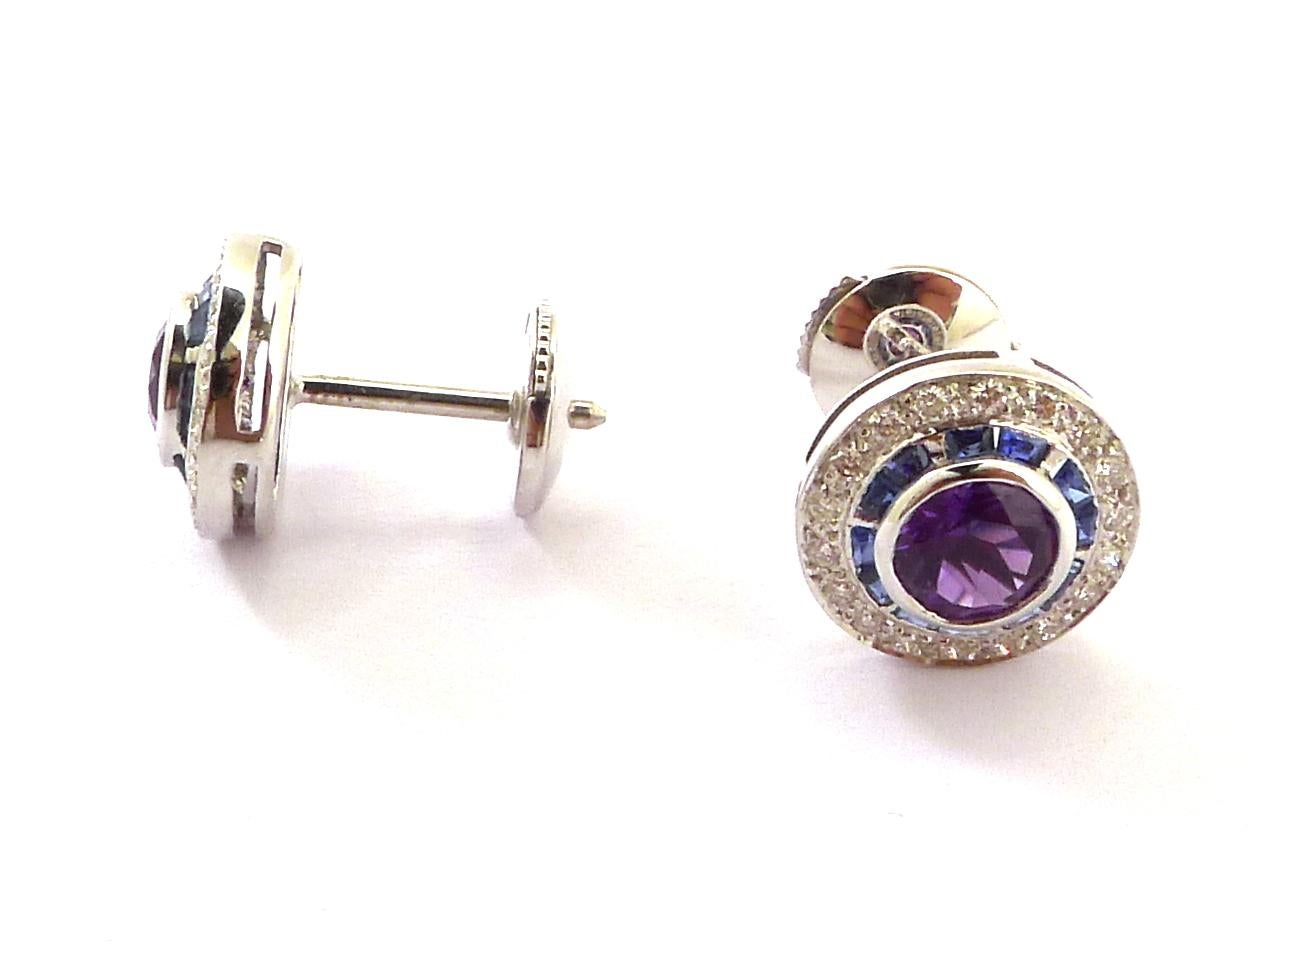 Centering a round brilliant cut amethyst surrounded by a fine line of baguette sapphires surrounded by round brilliant cut diamonds 

Mounted in 18k white gold

- Amethyst : 0.90cts
- Sapphire: 0.40cts
- Diamond: 0.18cts
- Gold: 3.35grs
- Total